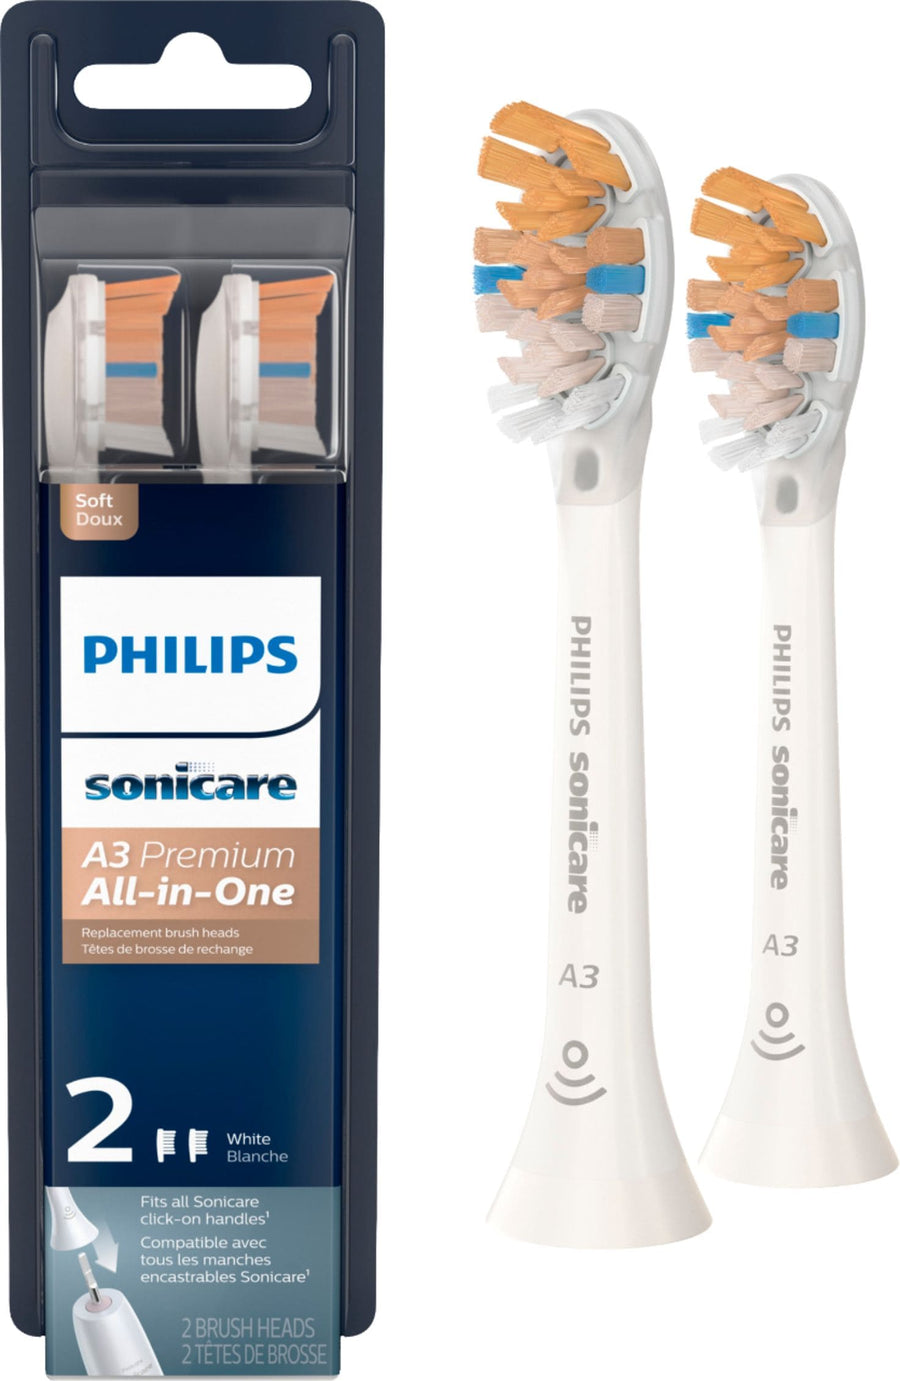 Philips Sonicare - Premium All-in-One (A3) Replacement Toothbrush Heads, (2-pack) - White_0